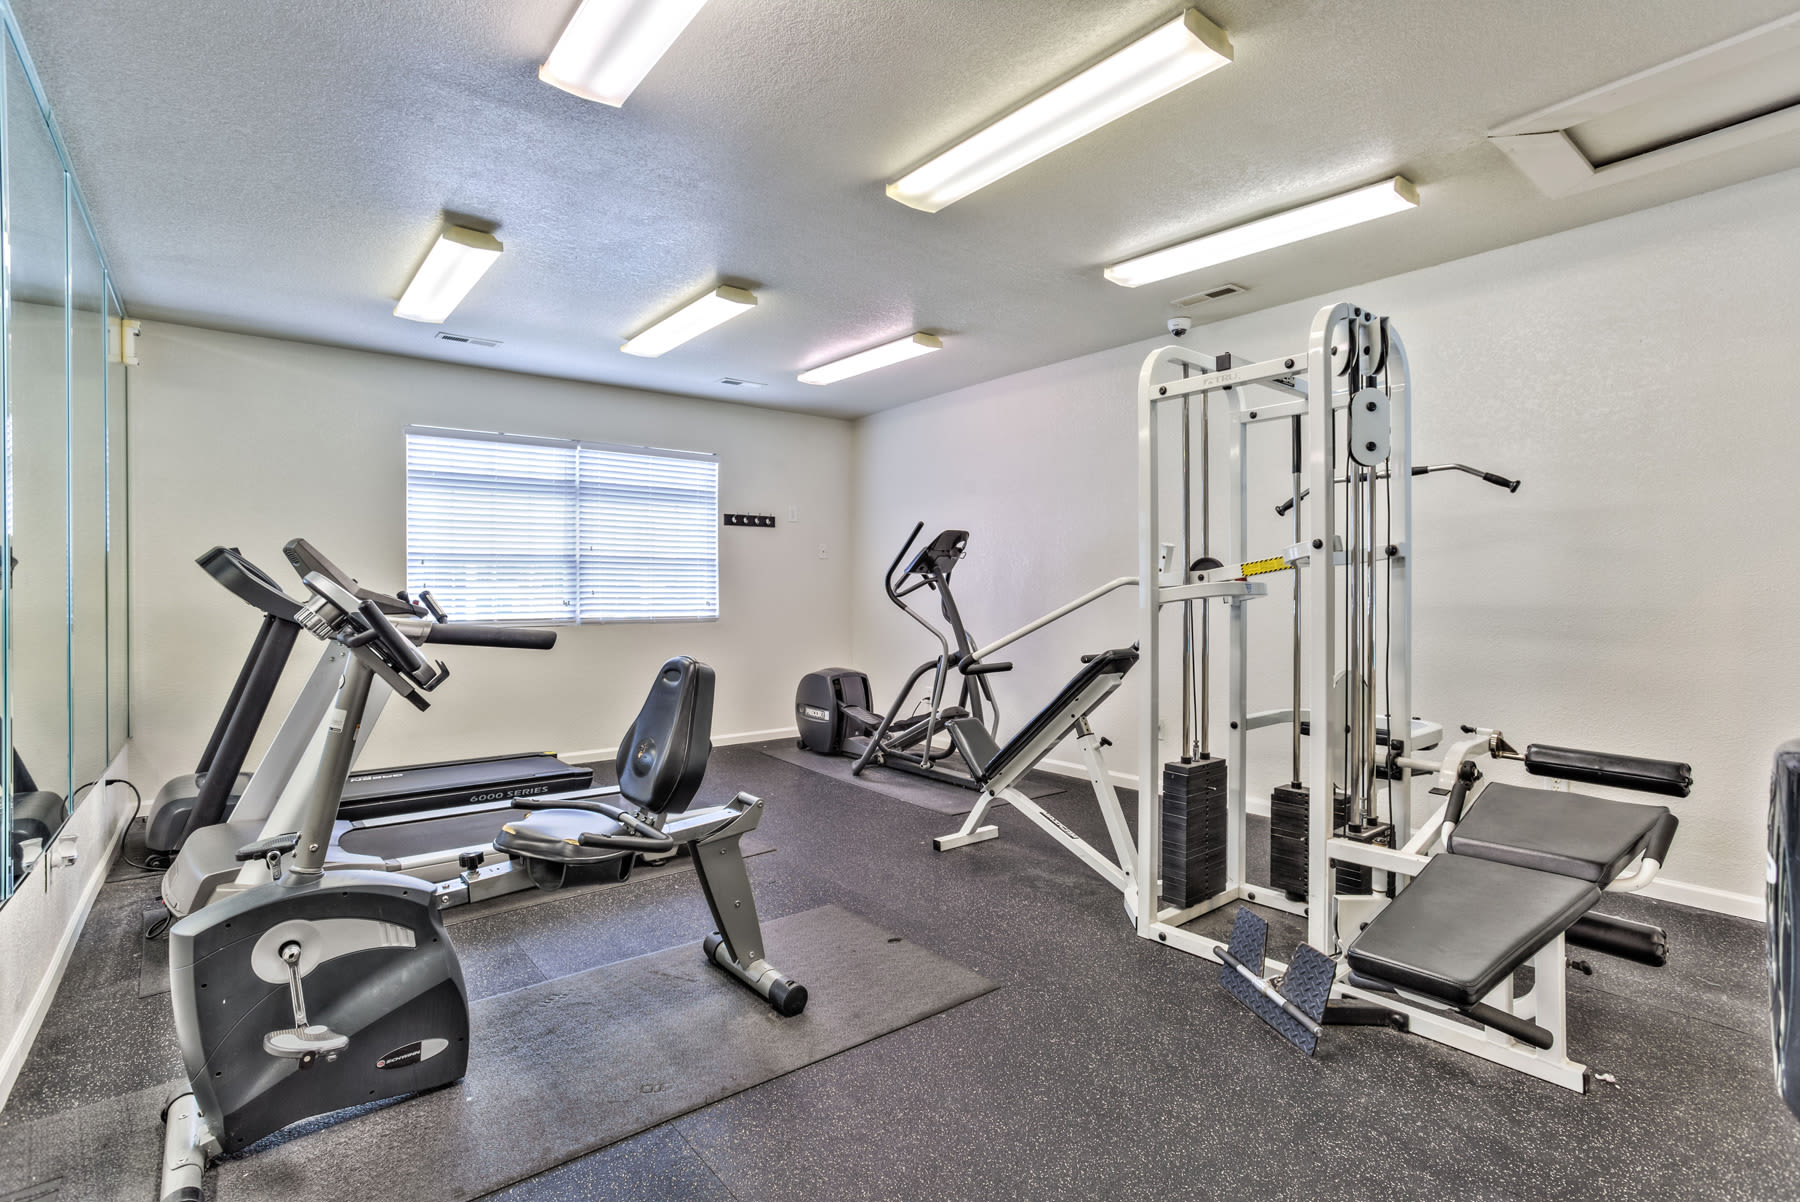 Fitness area at Copper Mill Village in High Point, North Carolina